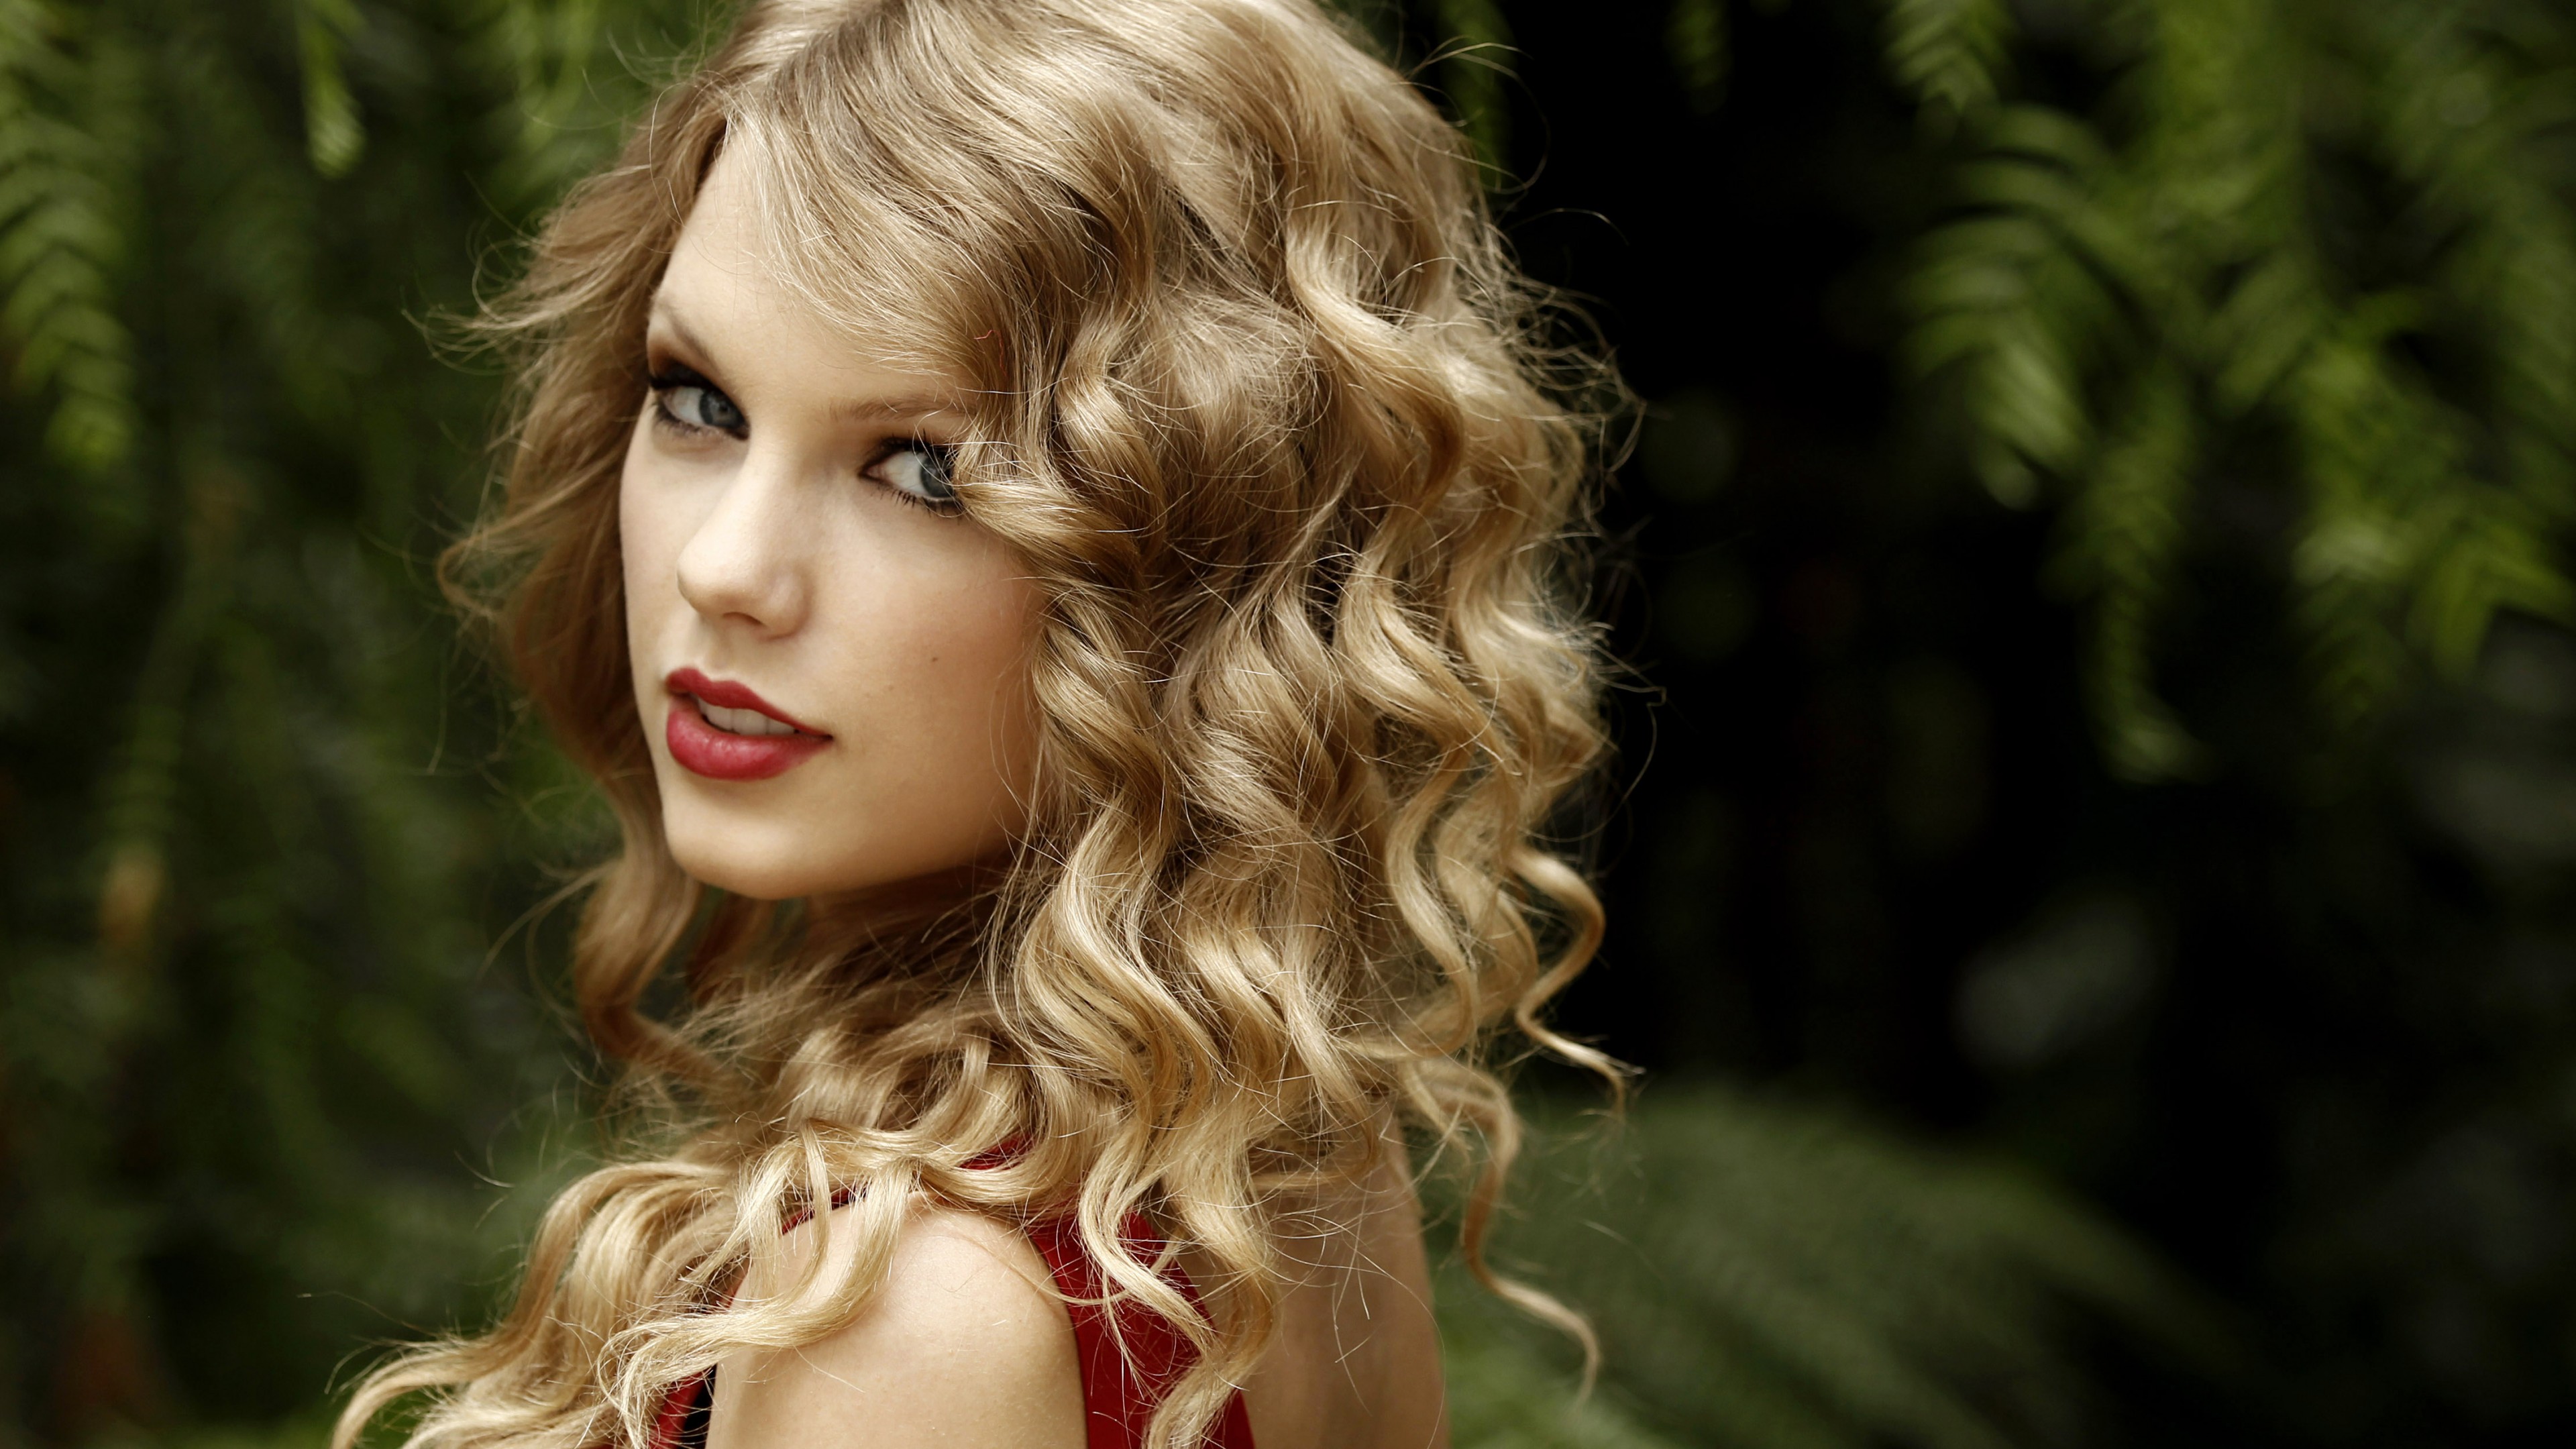 Wallpaper / Taylor Swift, Taylor Alison Swift, artists, music, songwriter, actress red lips, hair, look, green free download